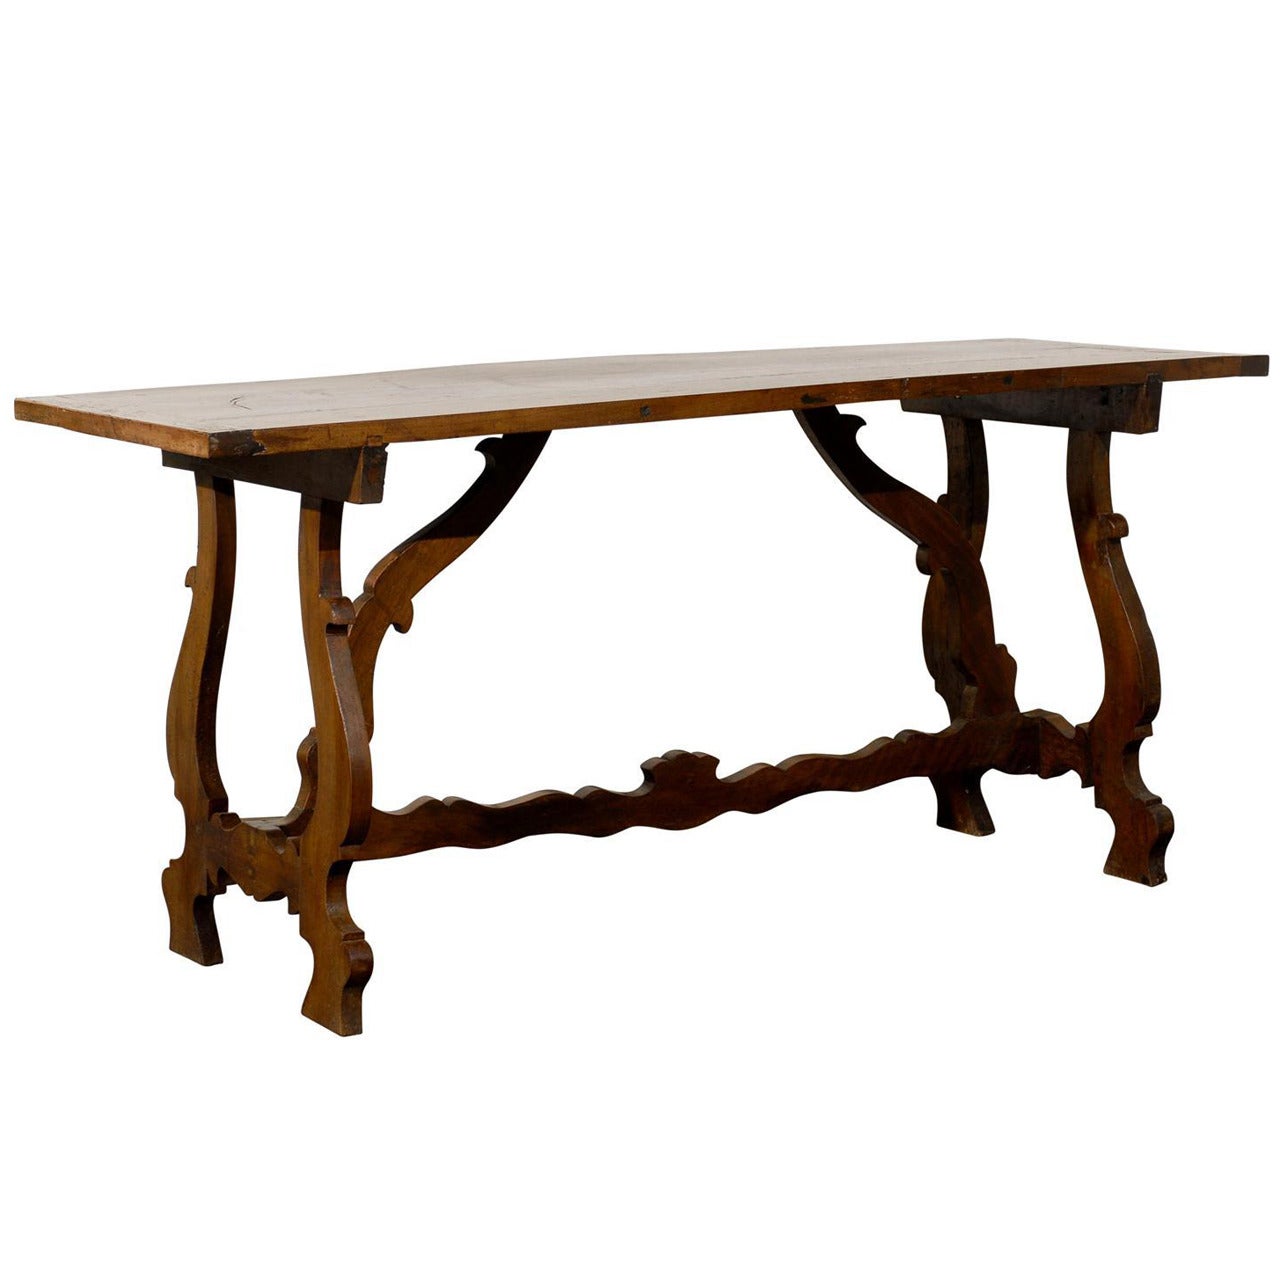 Spanish Baroque Style Walnut Table with Stretcher from the Late 19th Century